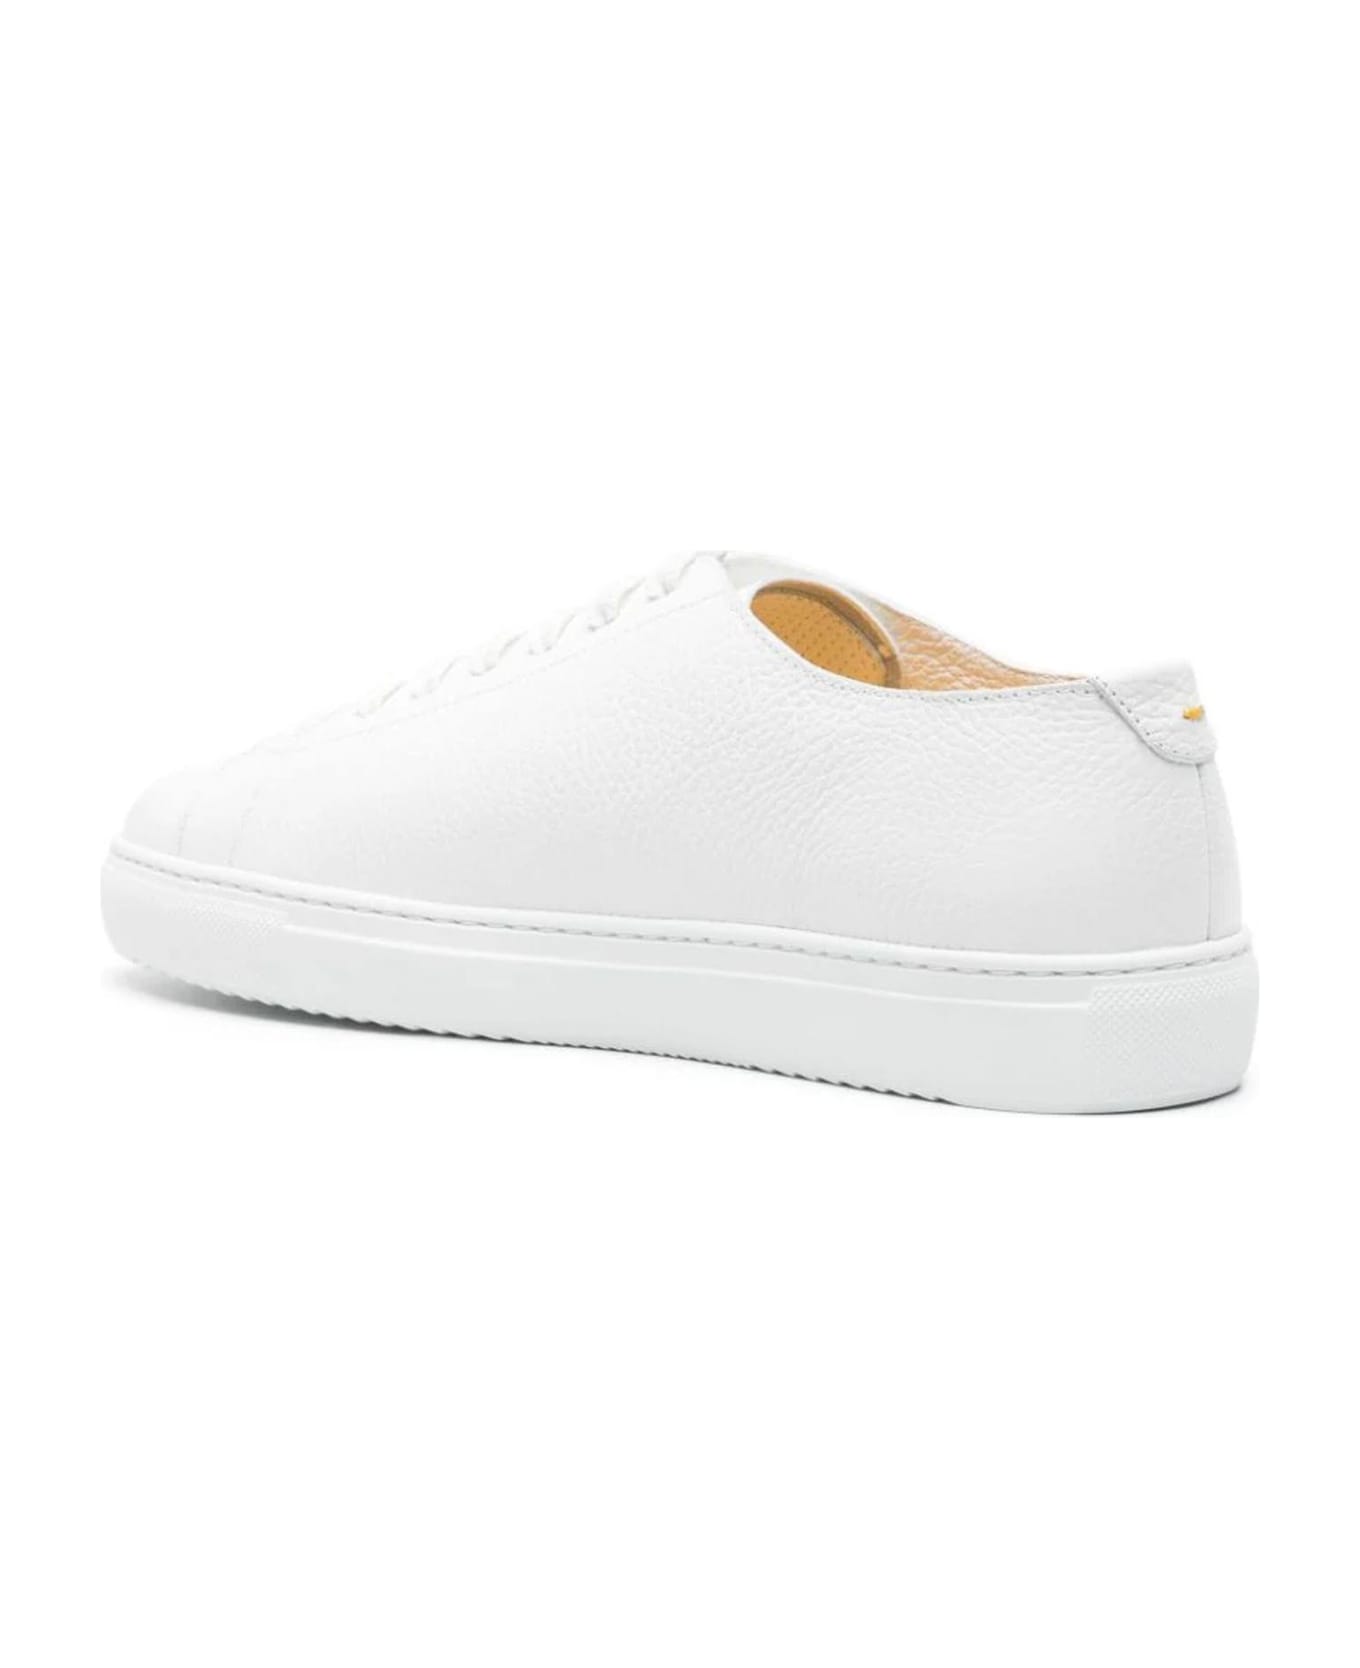 Doucal's White Calf Leather Sneakers - Bianco